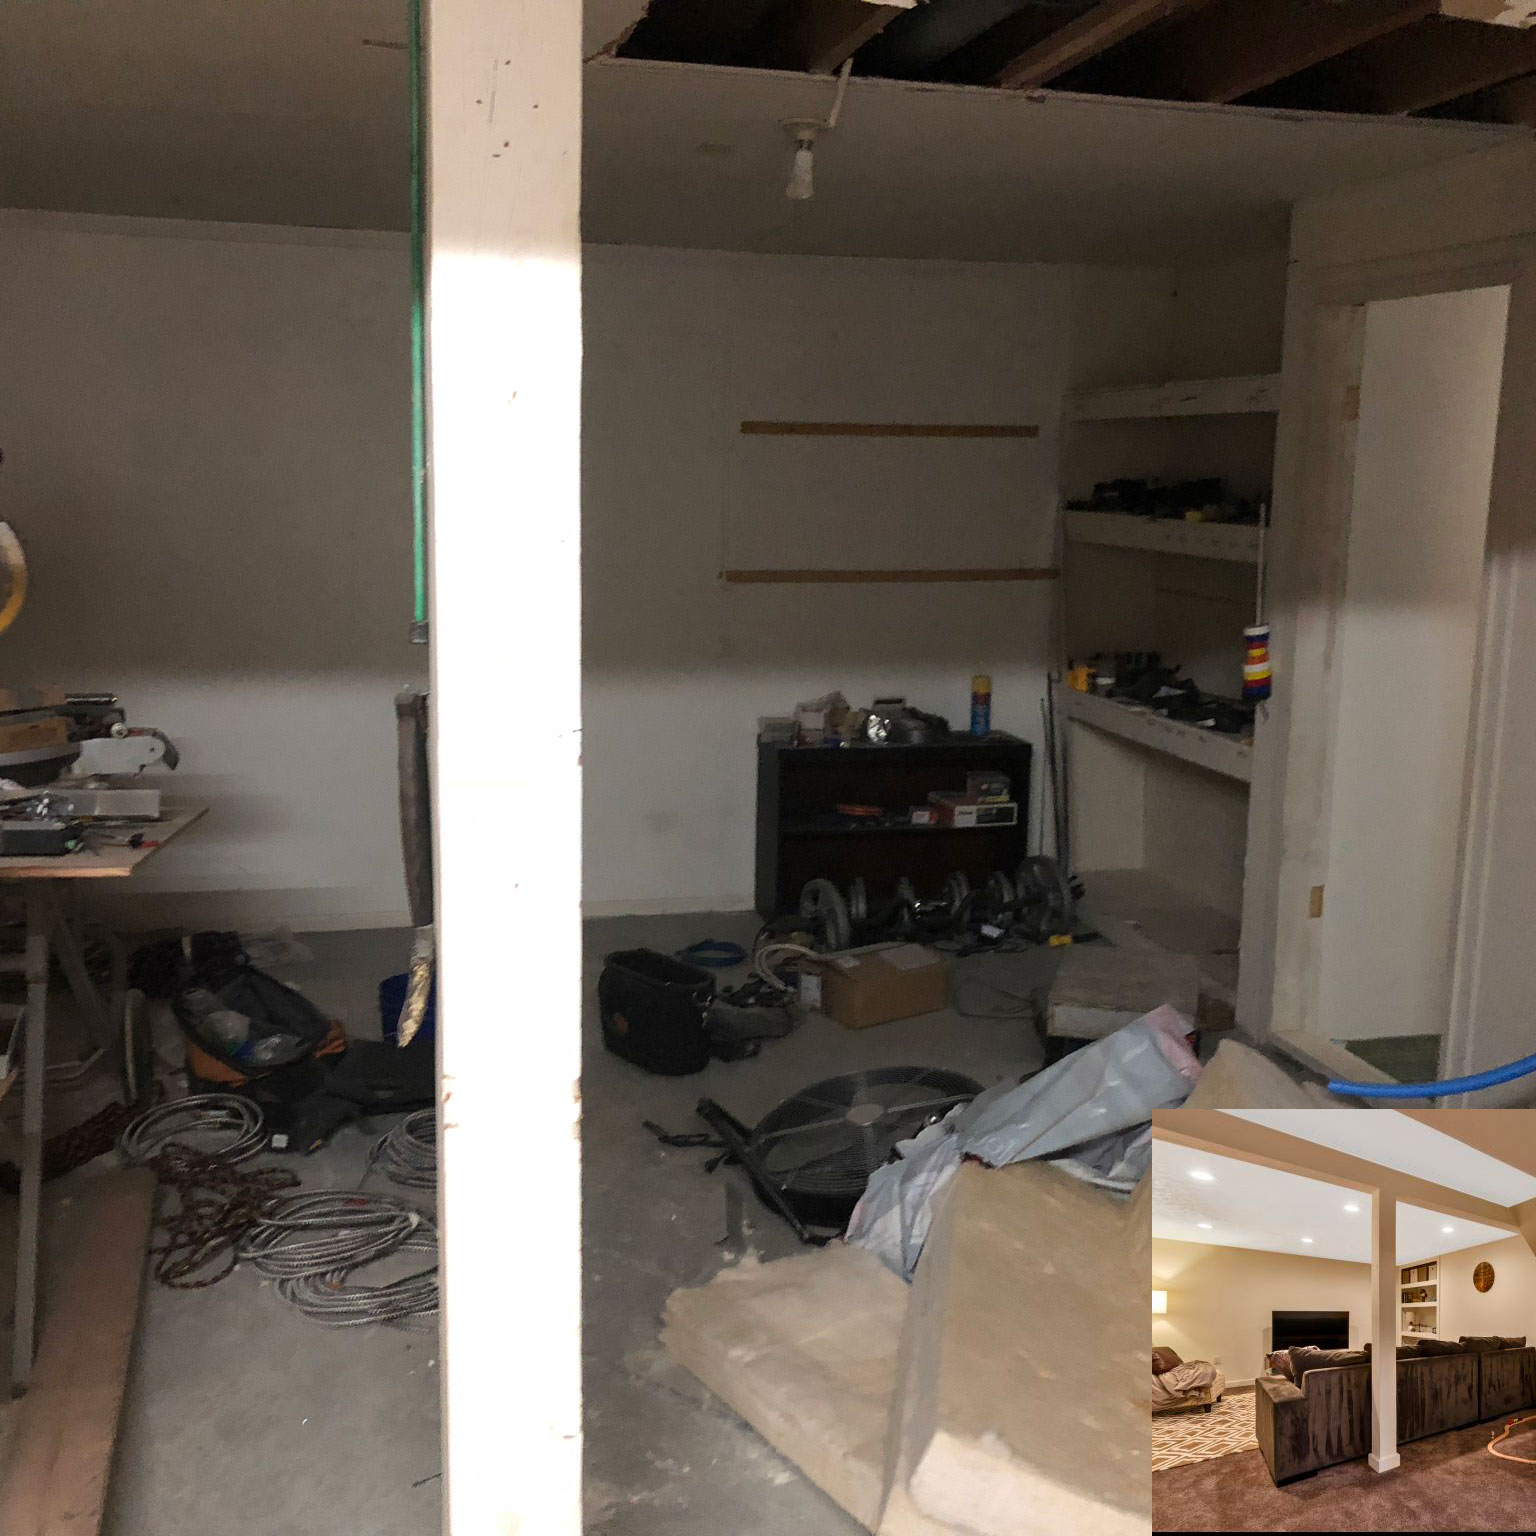 Family Room Renovation Before and After on a Budget